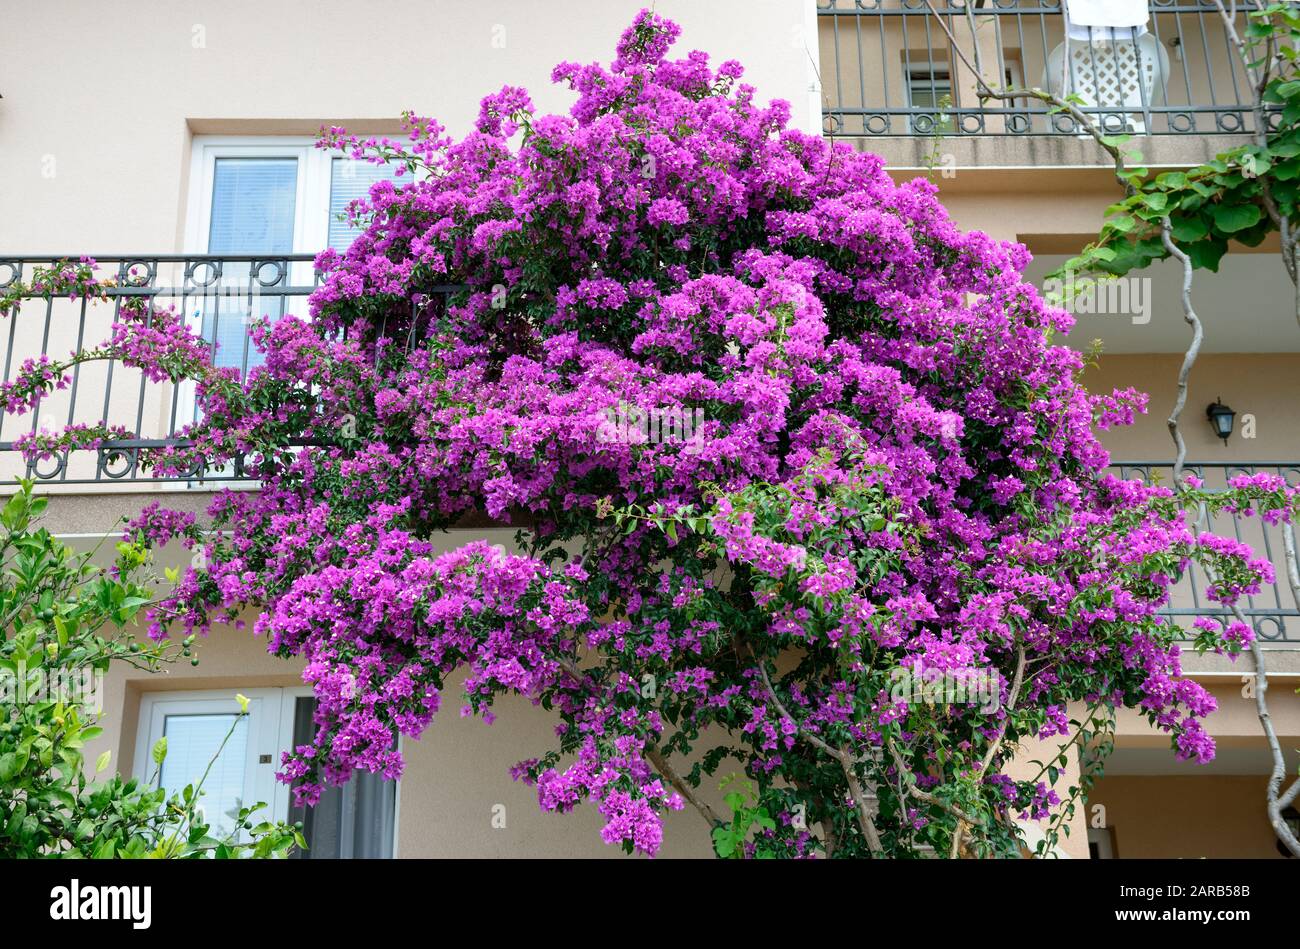 Close Up Flowering Bougainvillea Bush With Bright Pink Foliage On House External Wall Background Stock Photo Alamy